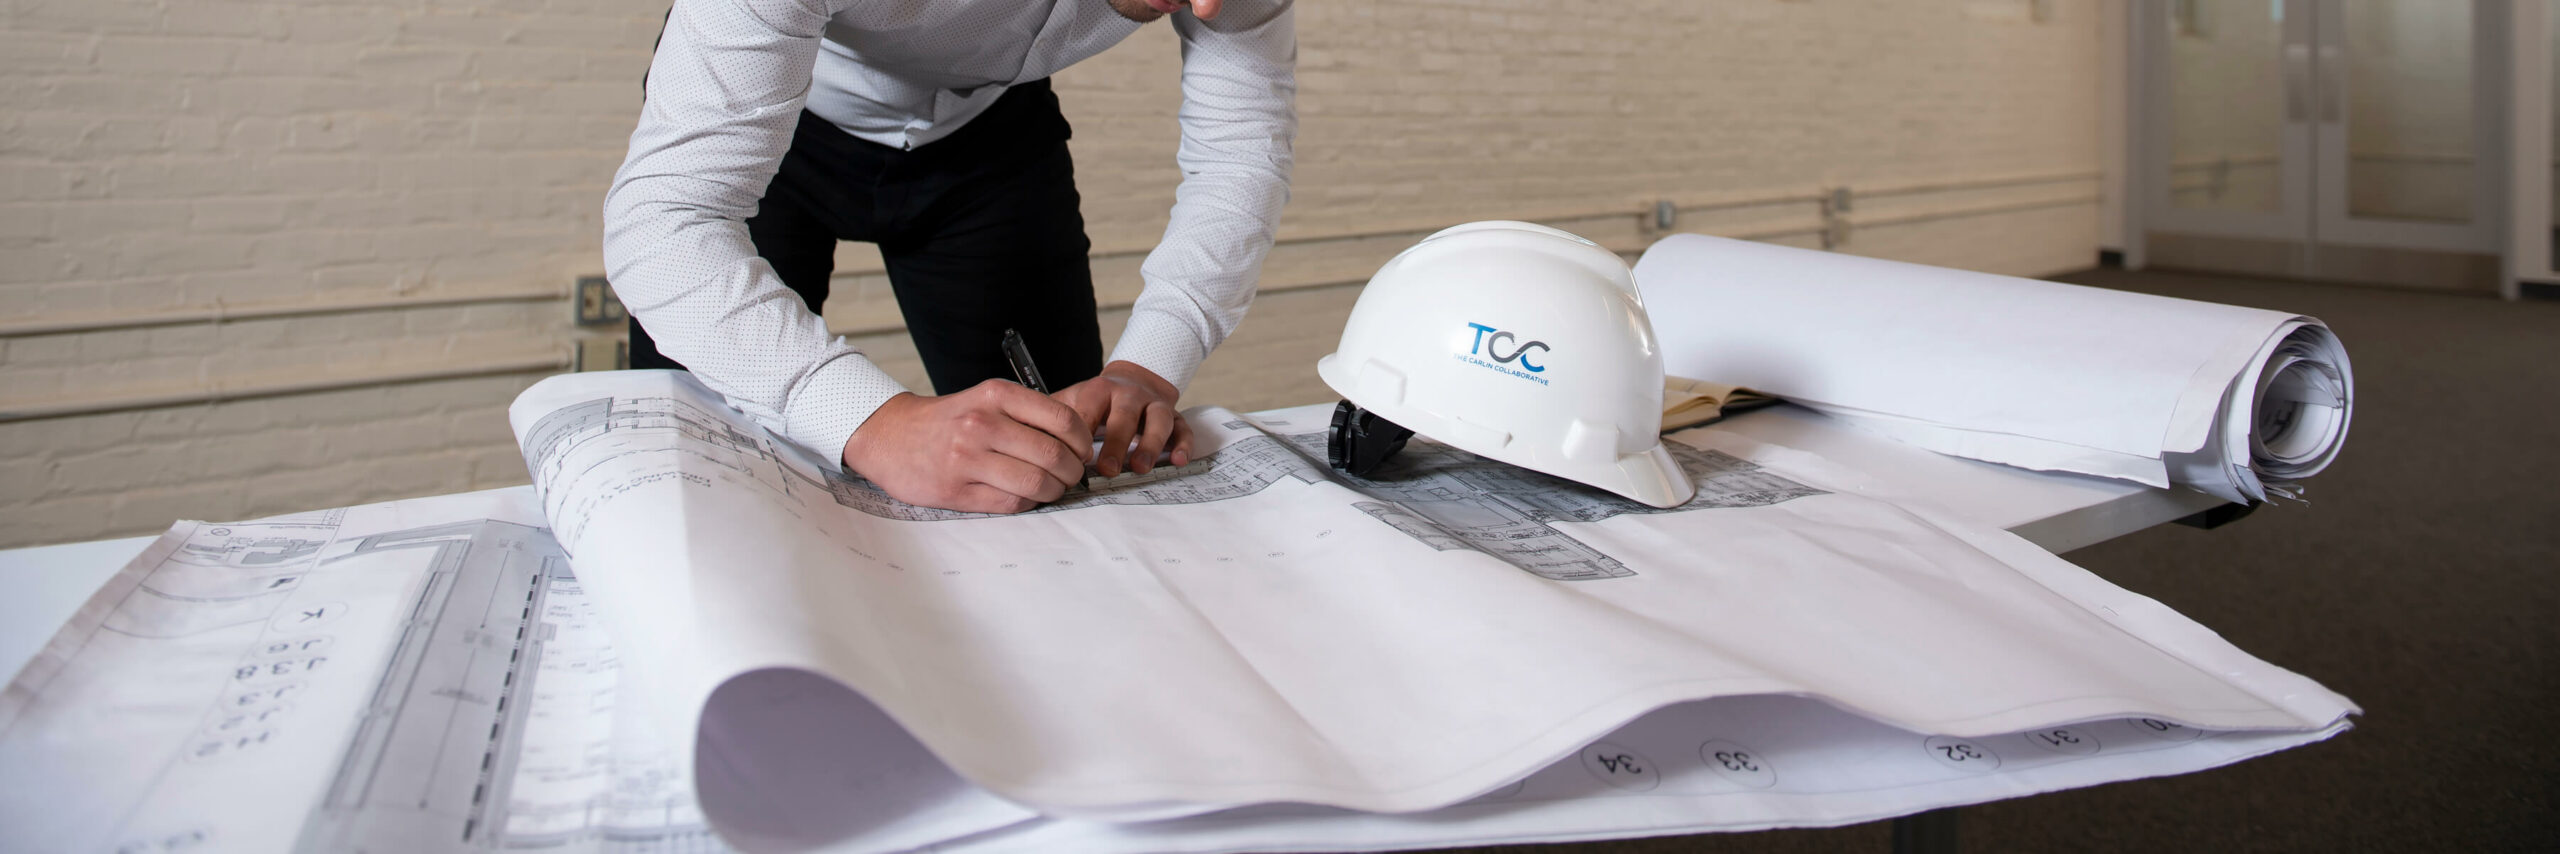 A man in a hard hat and white shirt is focused on working on a blueprint, displaying professionalism and dedication.